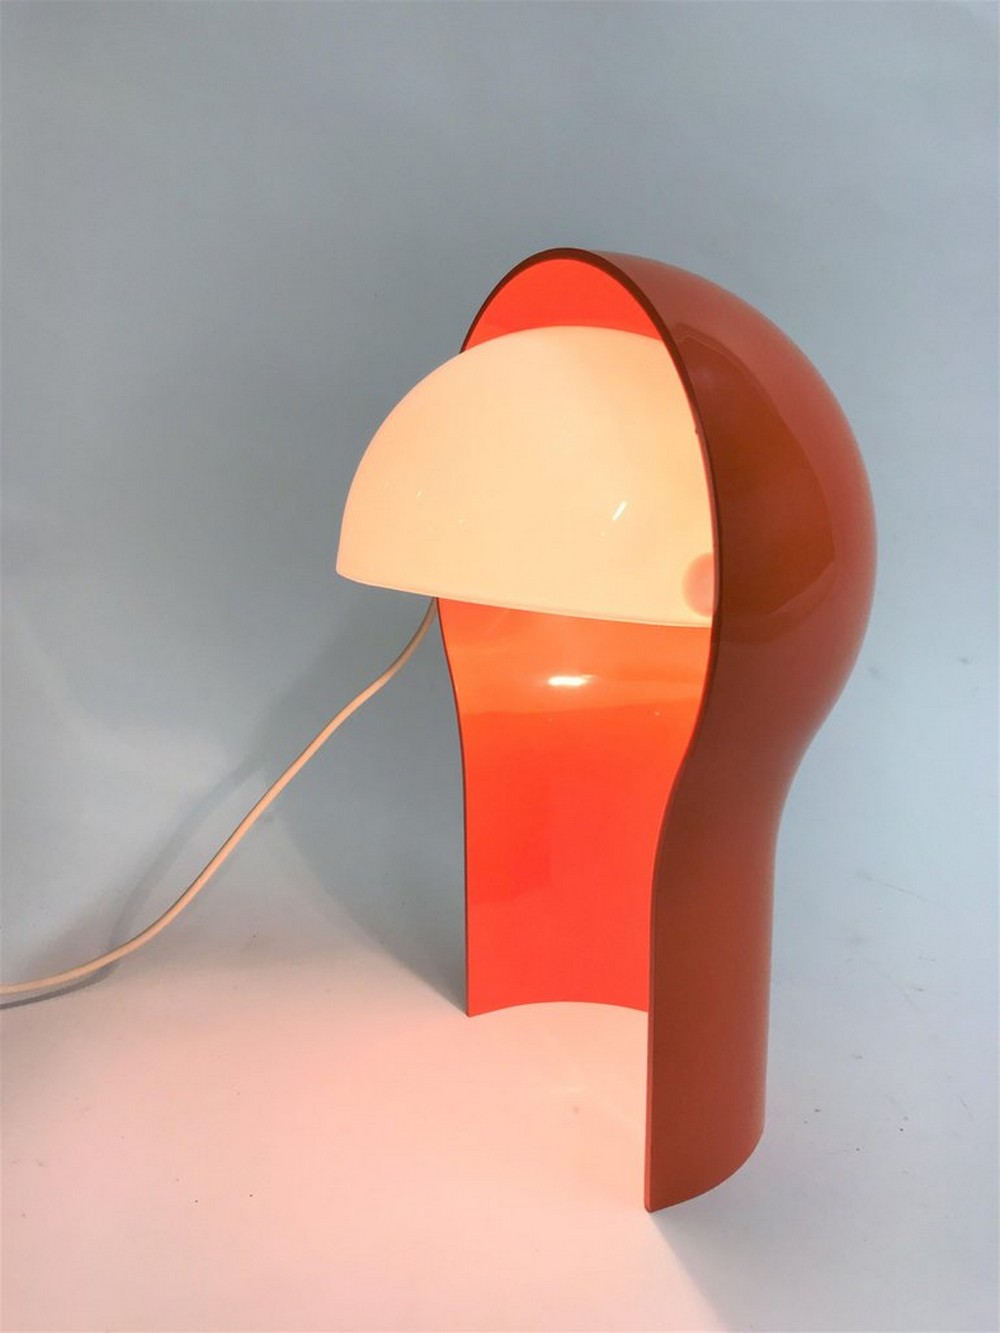 7 Bespoke Table Lamp Designs That Are At The 1stdibs Online Store 1stdibs 7 Bespoke Table Lamp Designs That Are At The 1stdibs Online Store 7 Bespoke Table Lamp Designs That Are At The 1stdibs Online Store 4